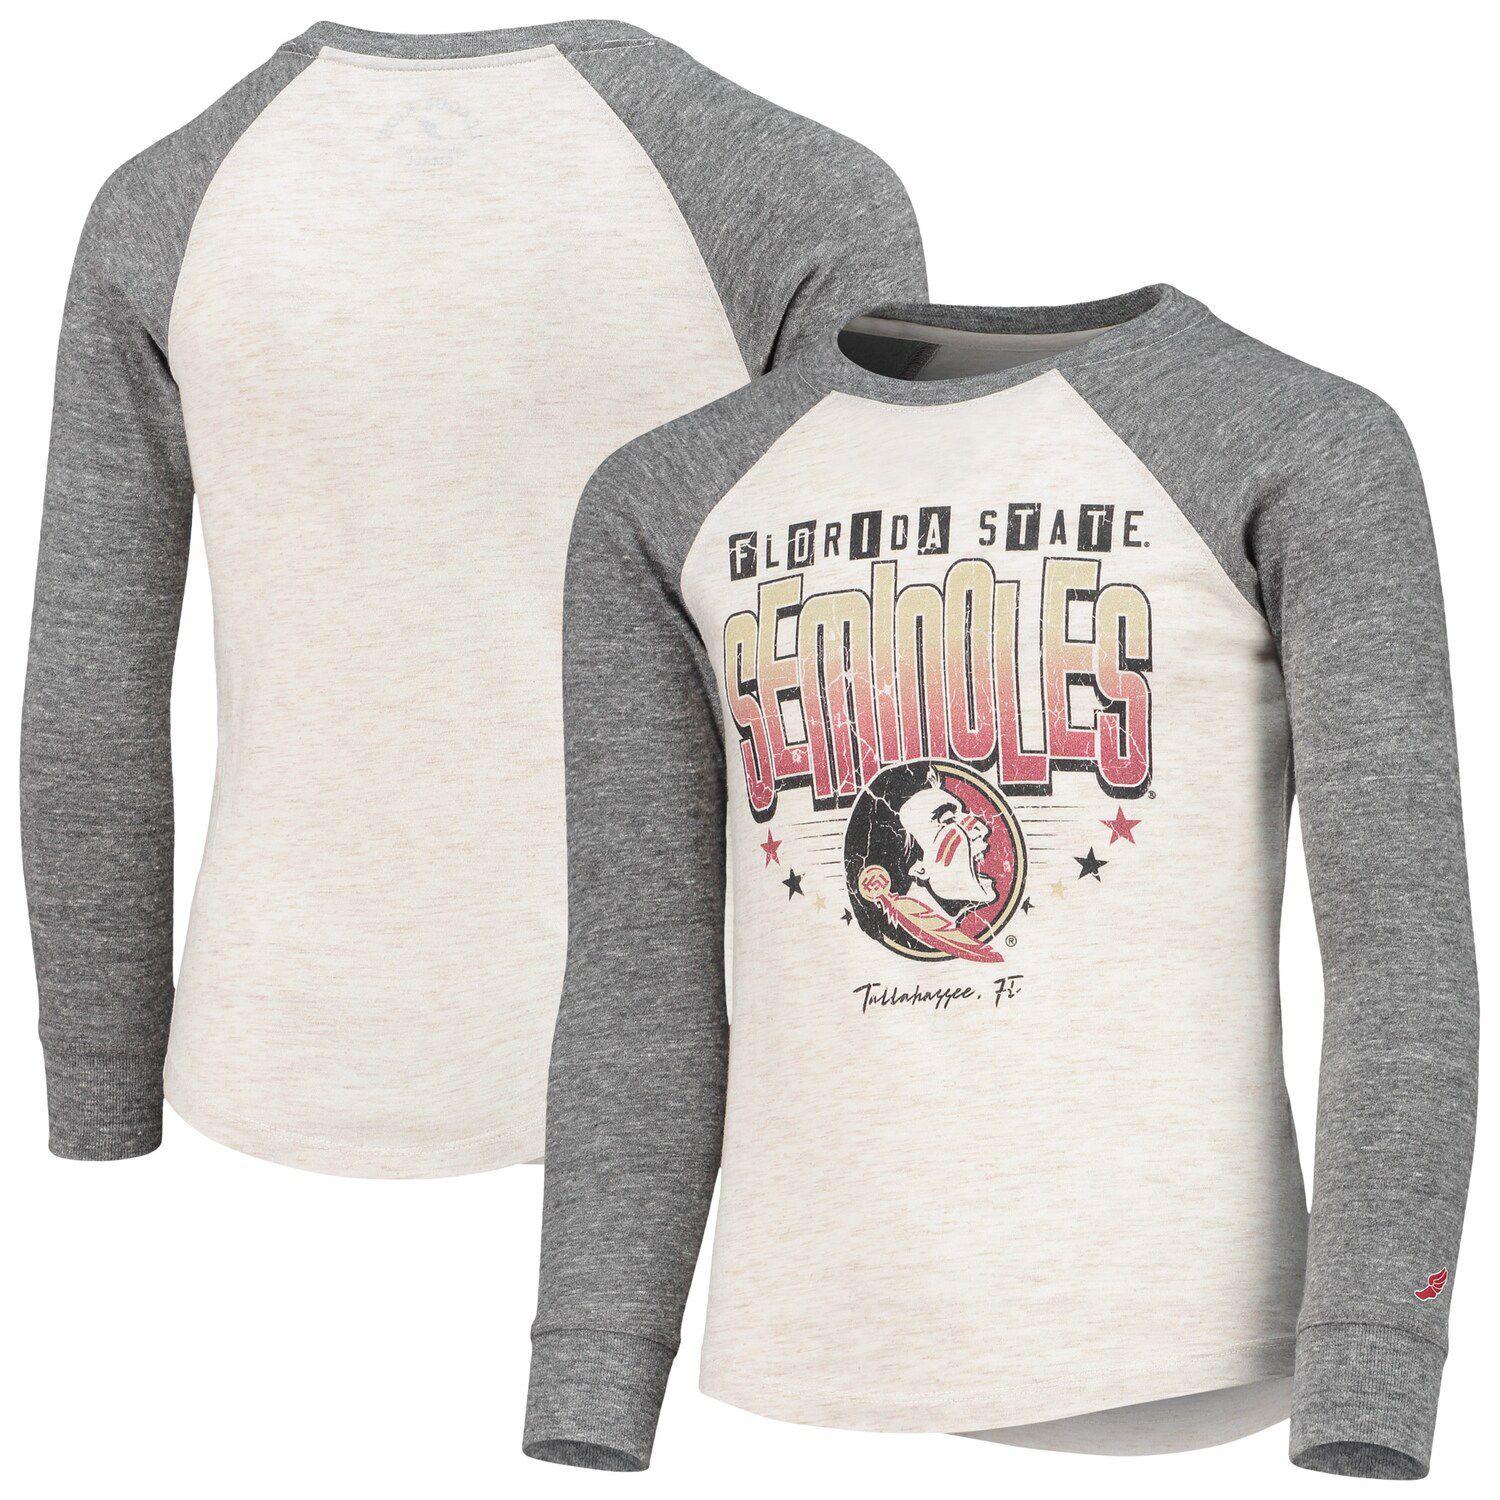 Image for Unbranded Youth League Collegiate Wear Heathered Gray Florida State Seminoles Baseball Tri-Blend Raglan Long Sleeve T-Shirt at Kohl's.